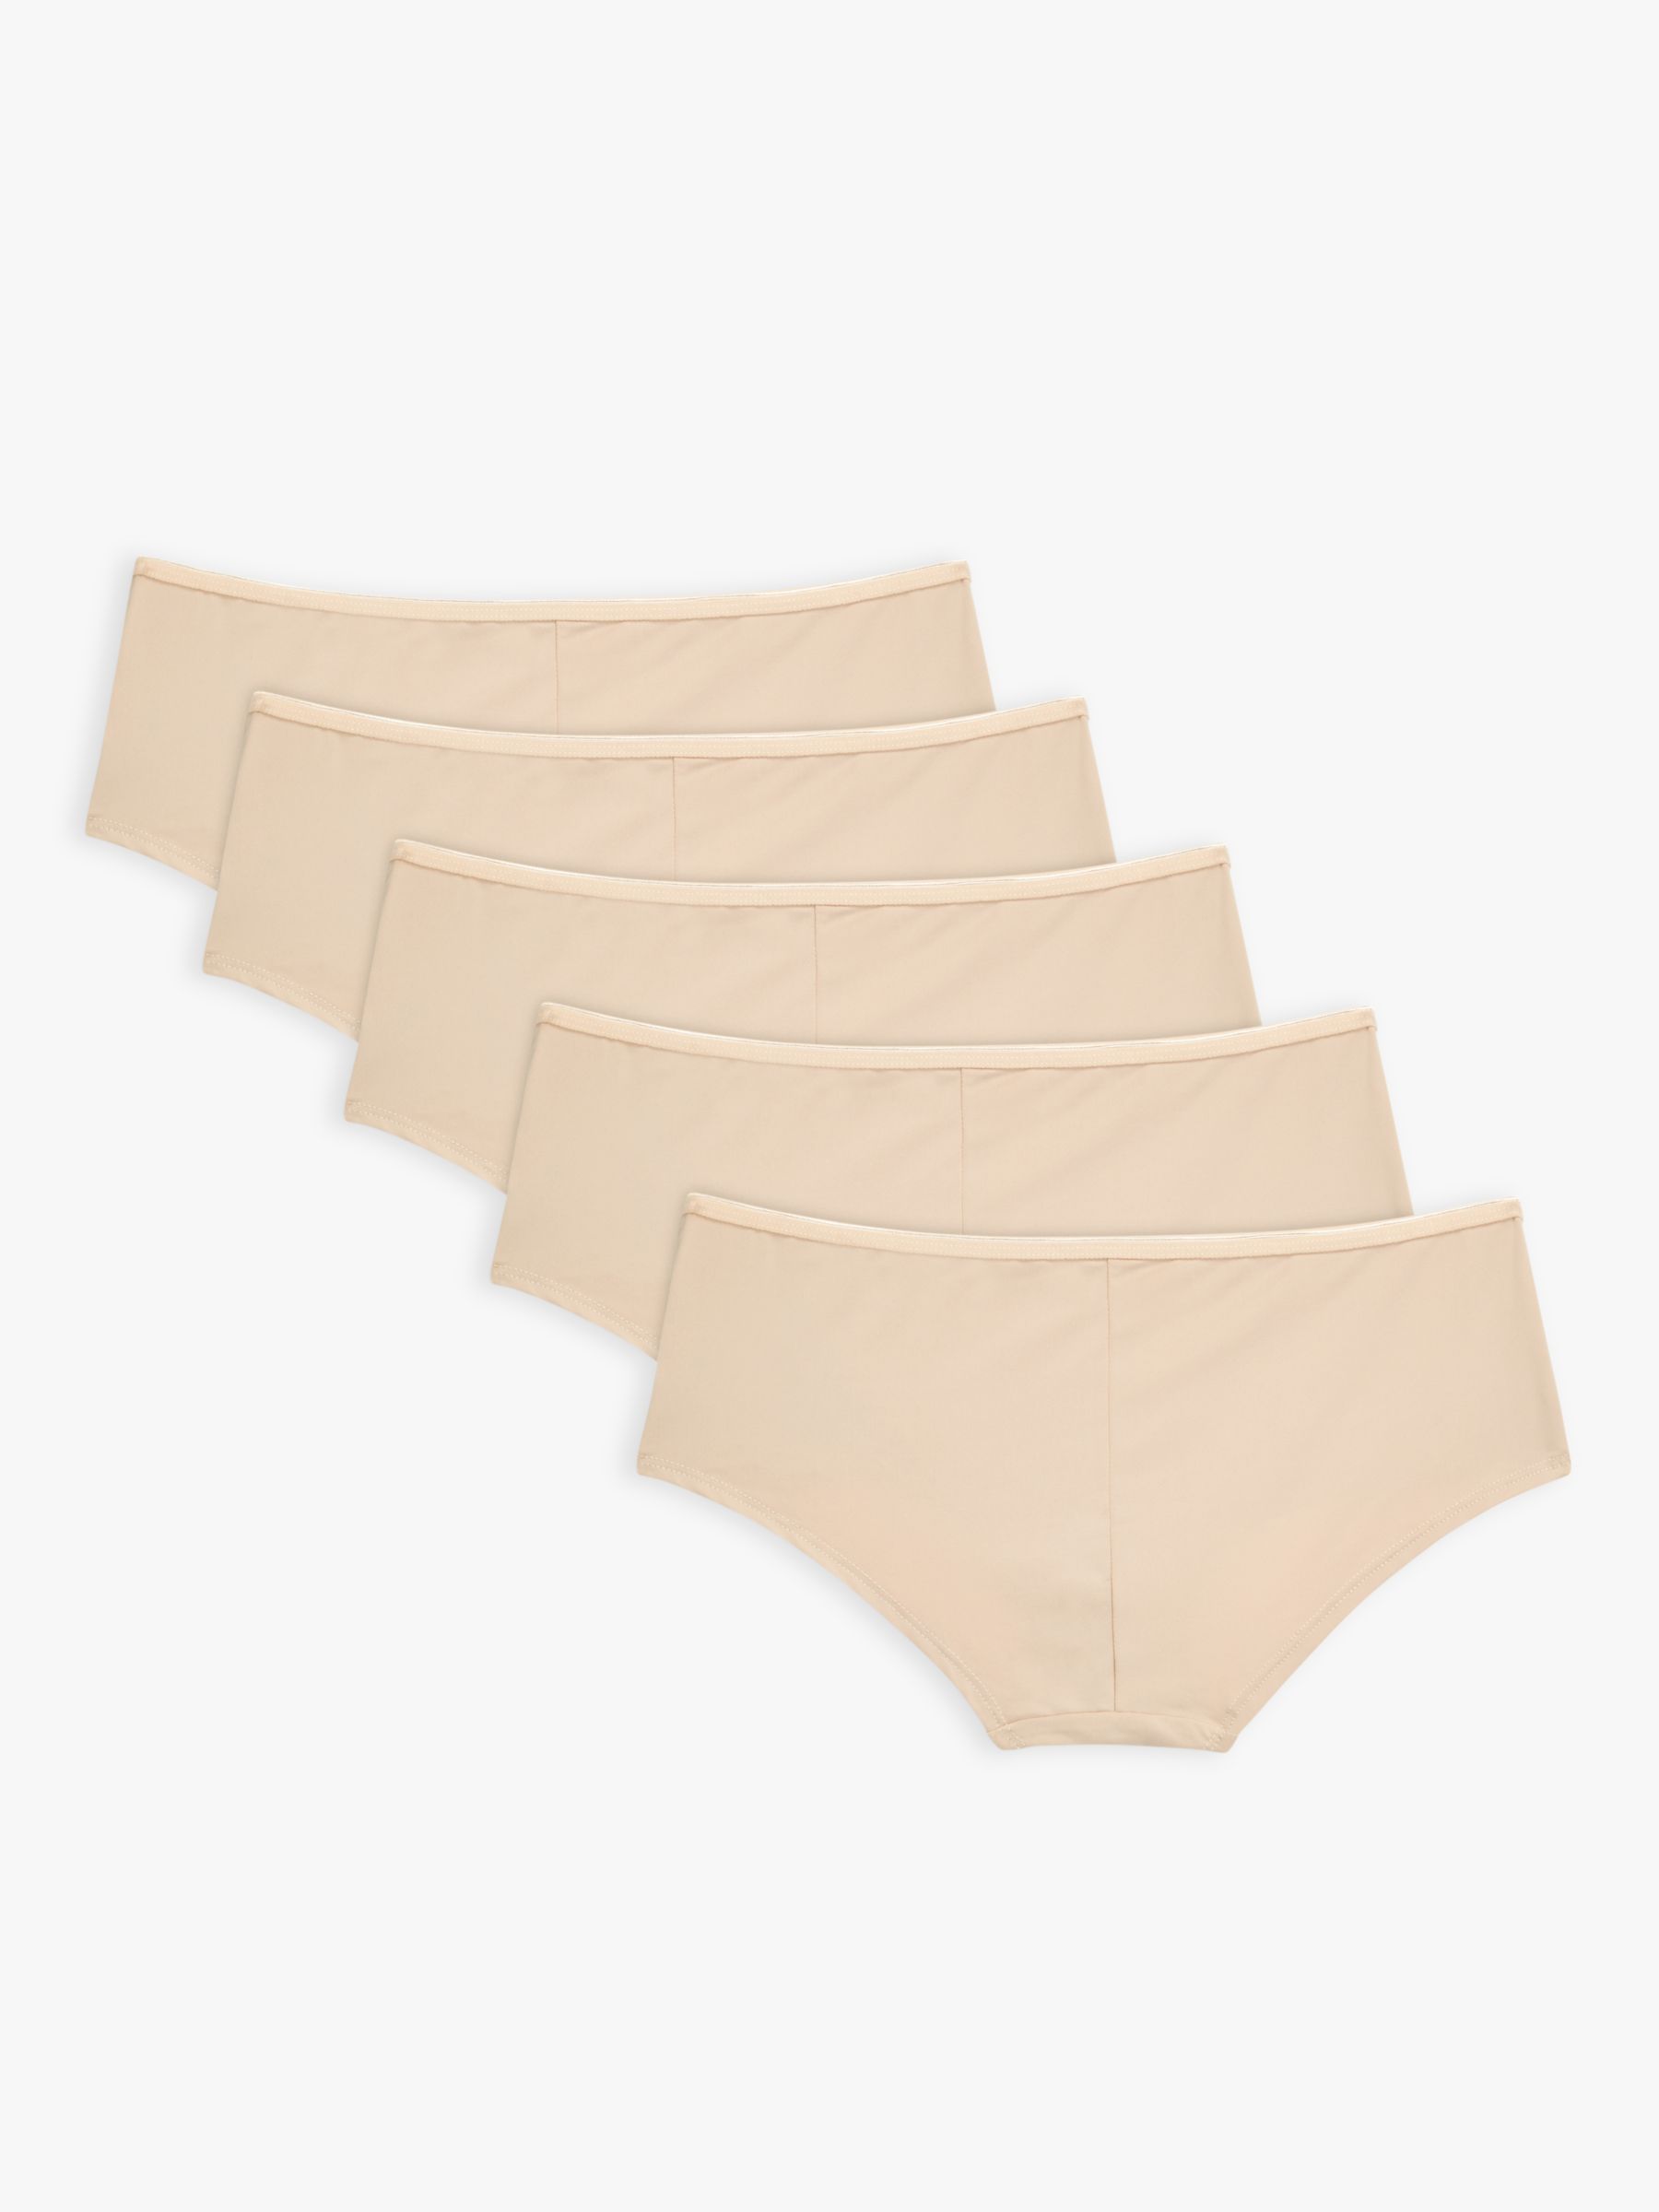 John Lewis ANYDAY Microfibre Short Knickers, Pack of 5, Natural at